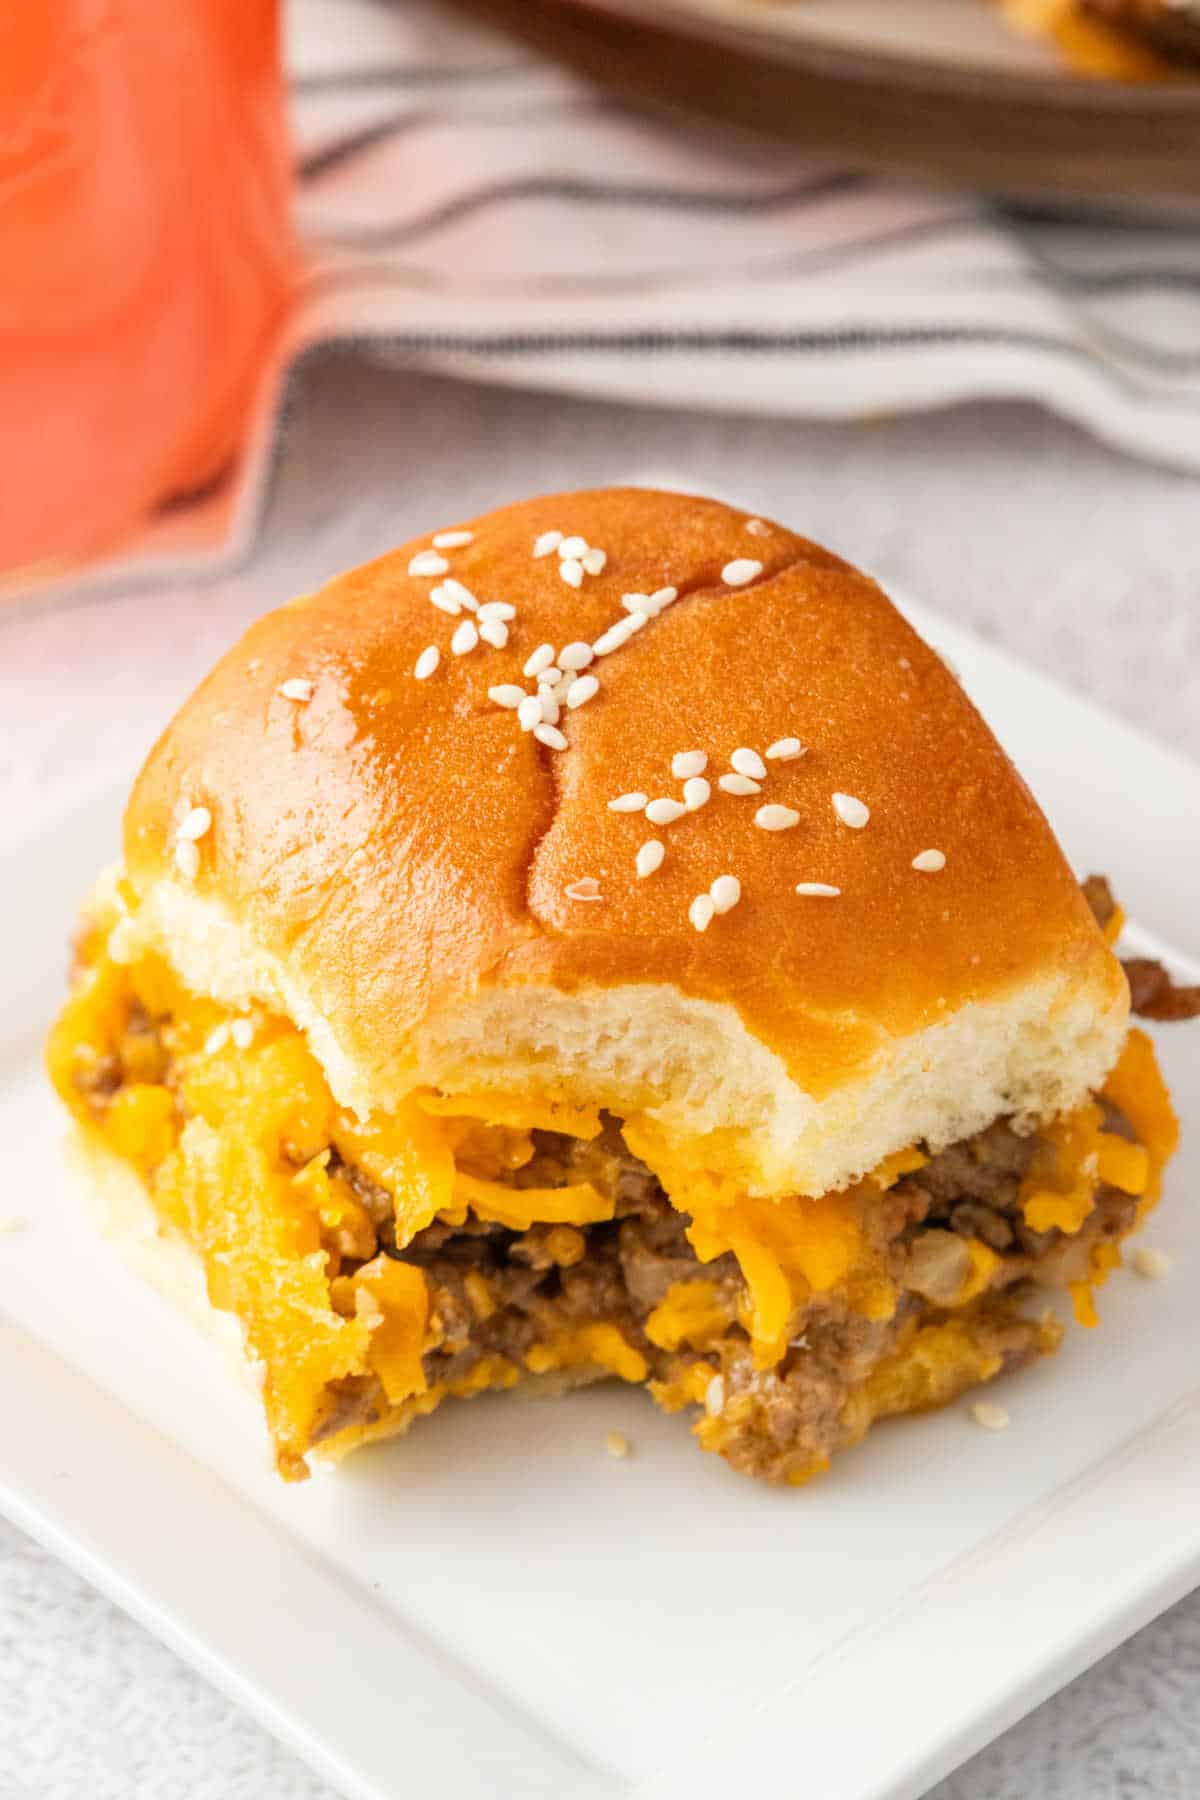 A cheeseburger slider with a bite out of it on a plate.